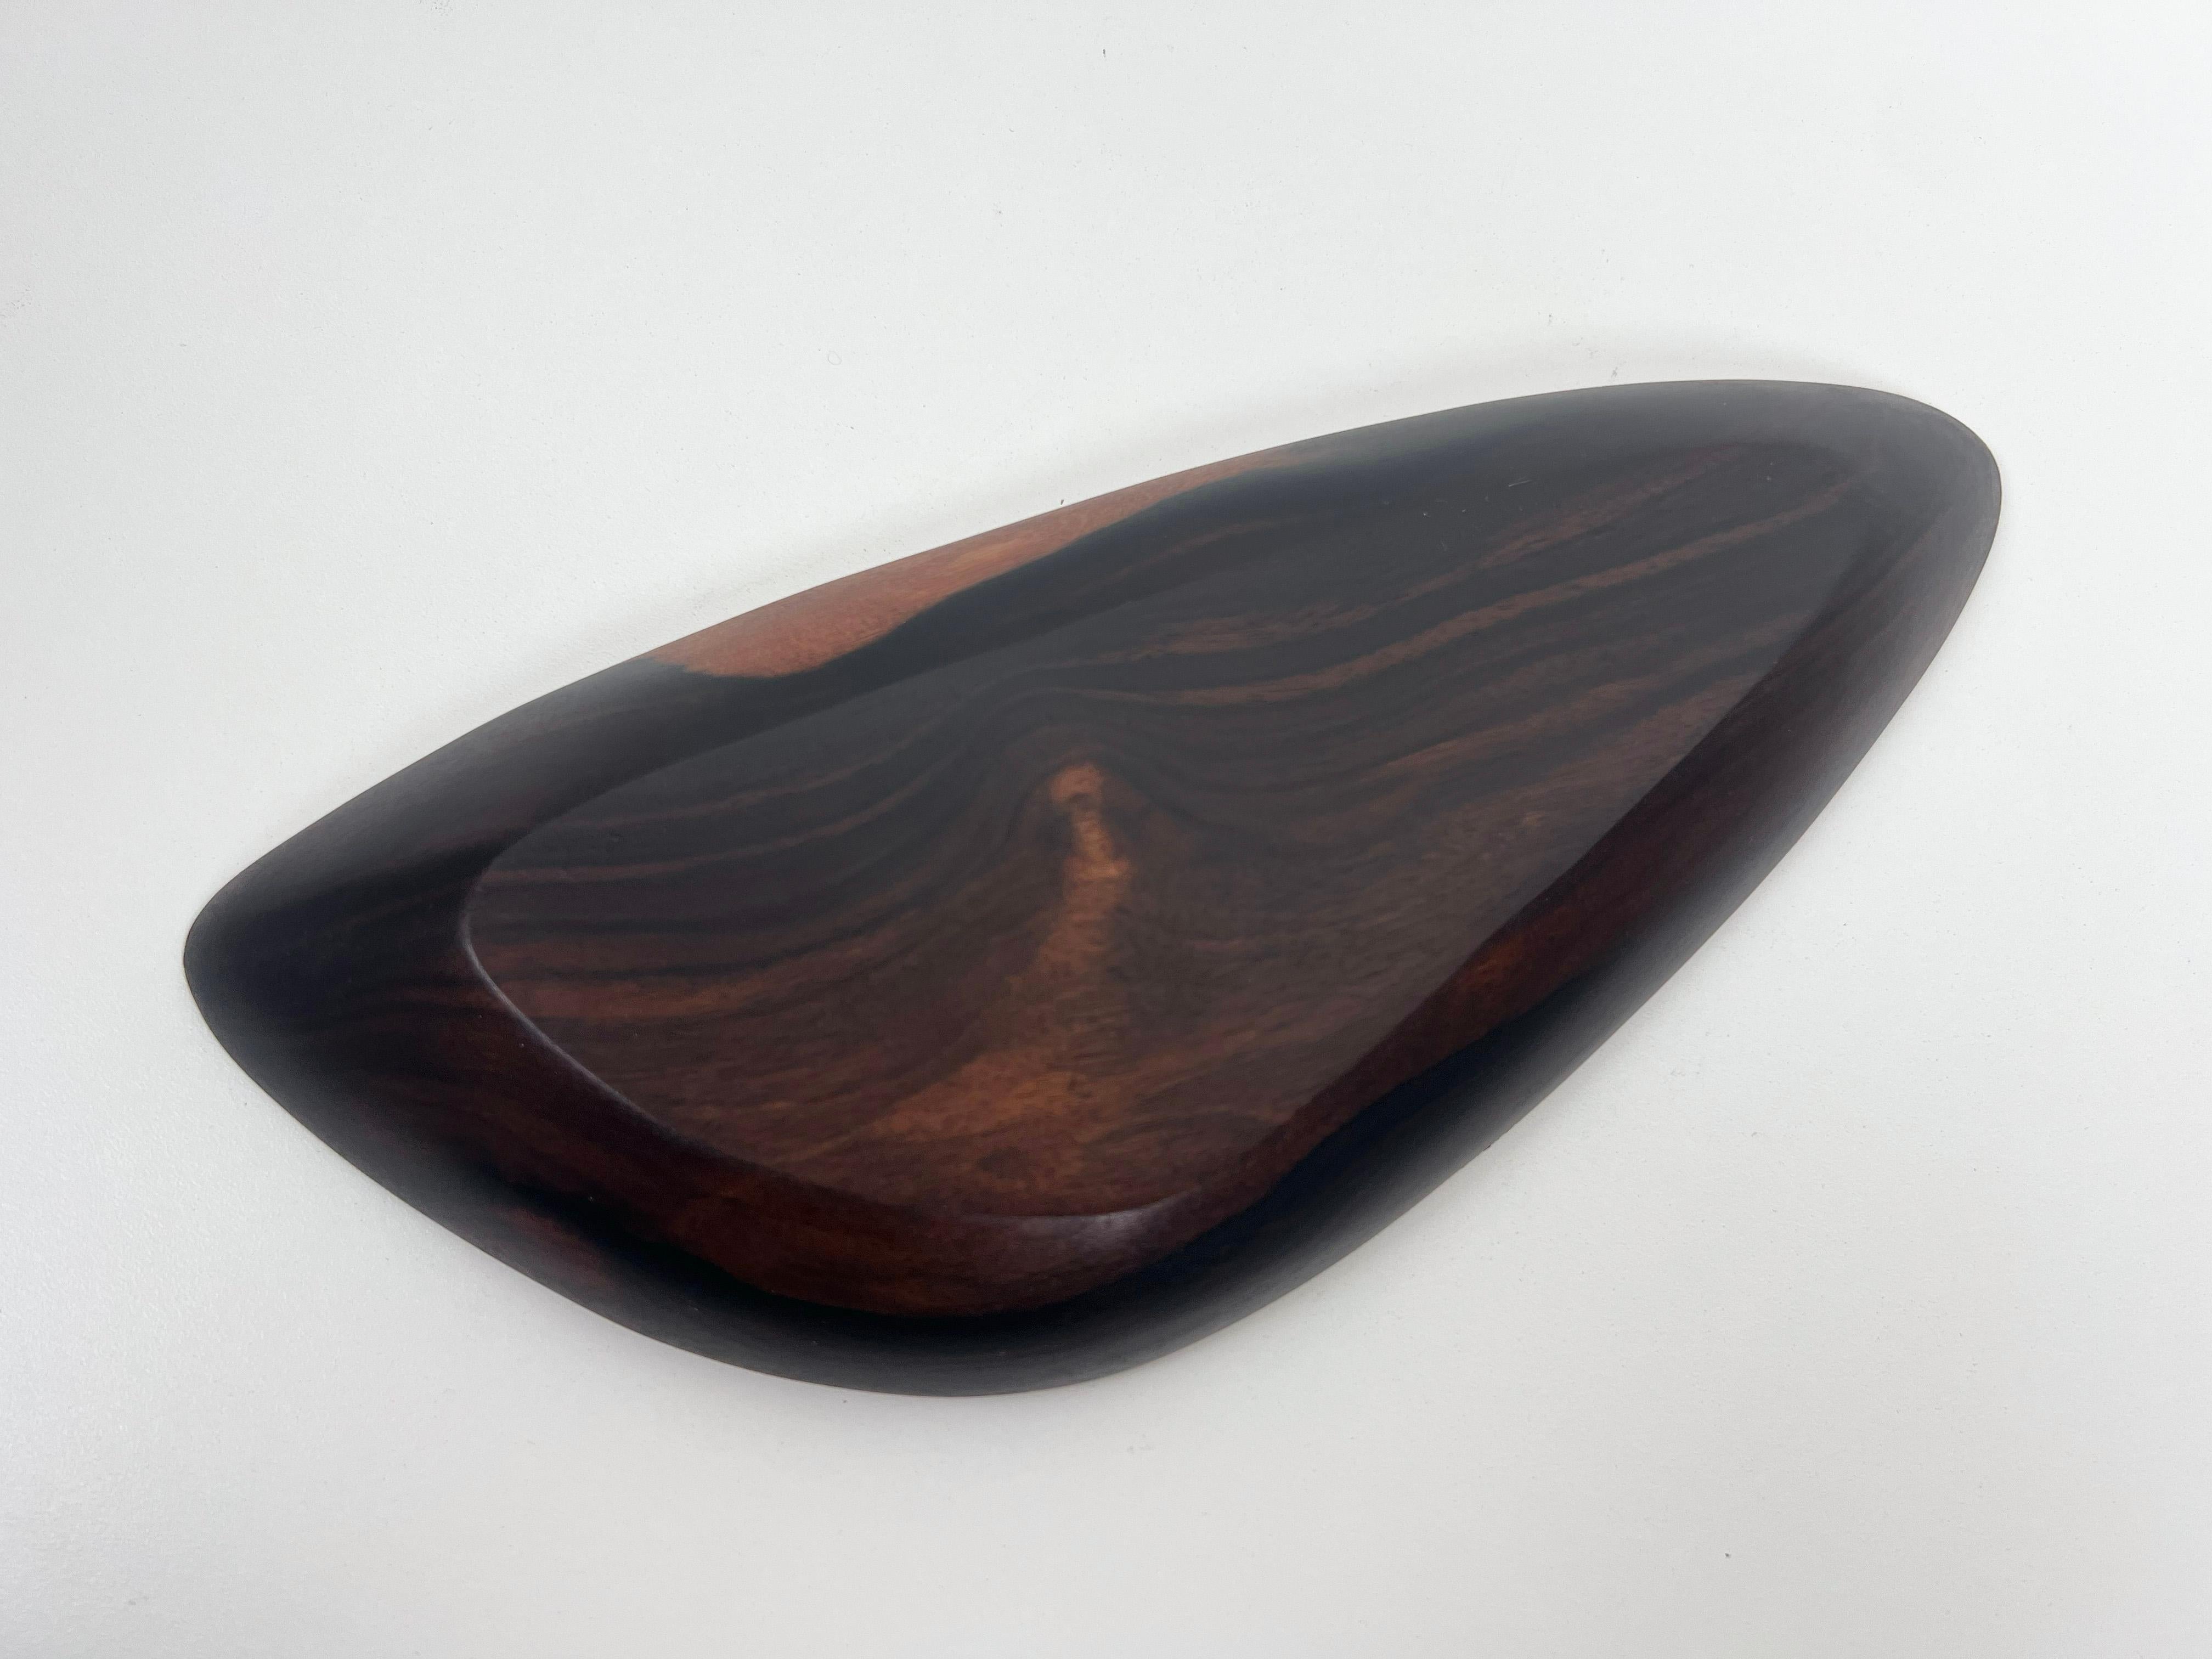 Vintage Brazilian Rosewood Divided Bowl In Excellent Condition For Sale In Fort Lauderdale, FL